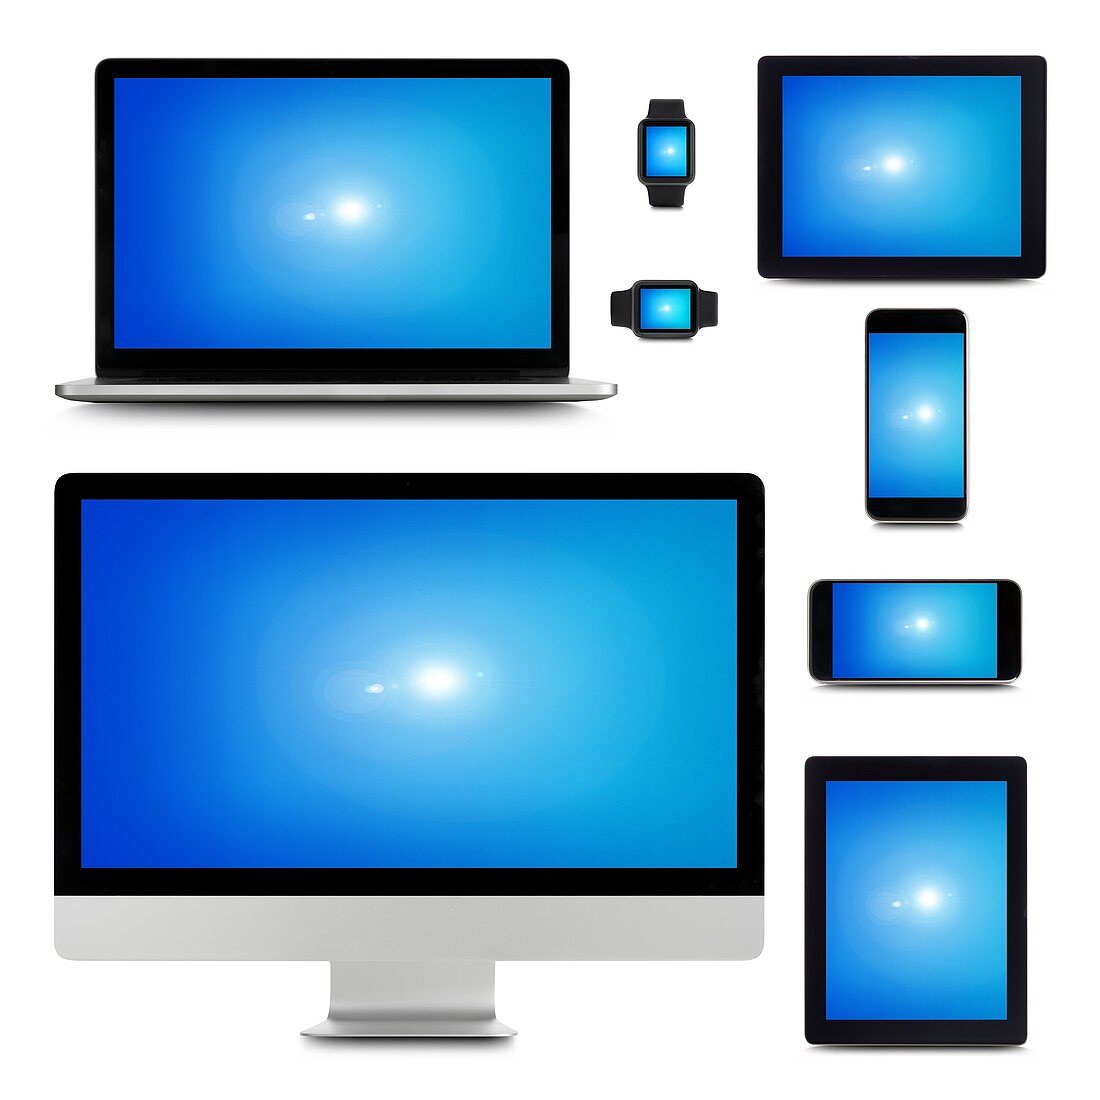 Blue screens on digital devices